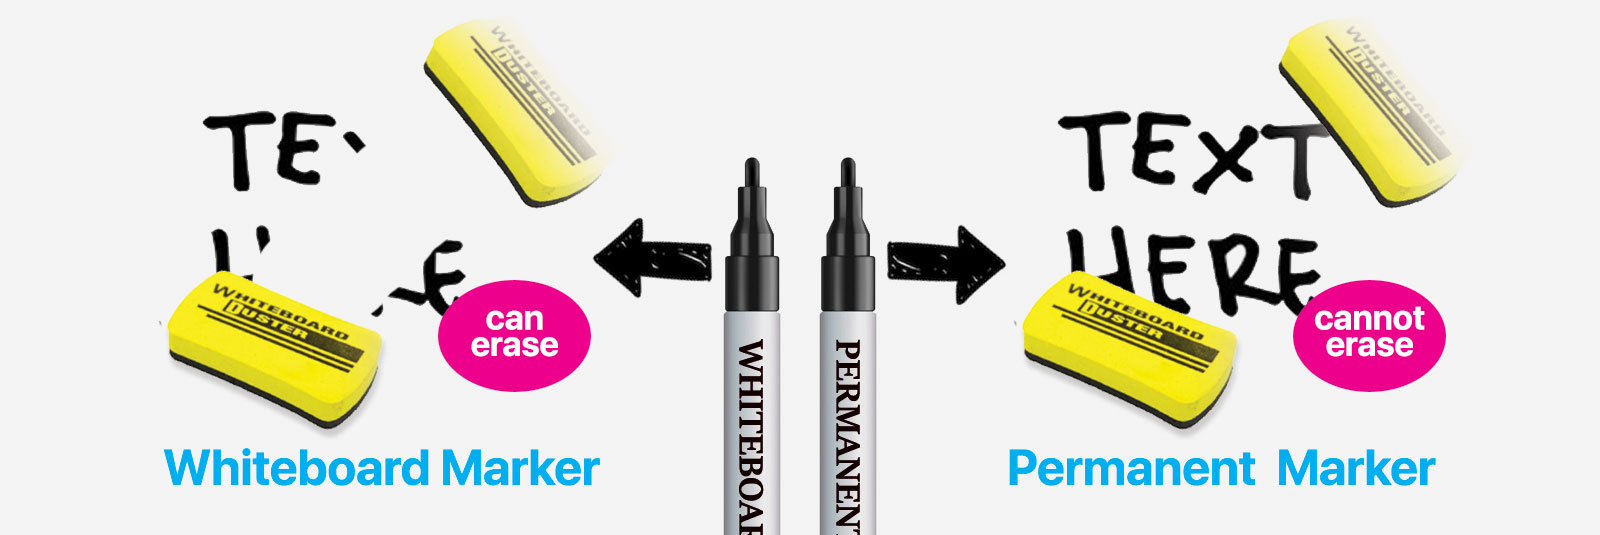 Whiteboard Marker can erase, Permanent Marker cannot be erased